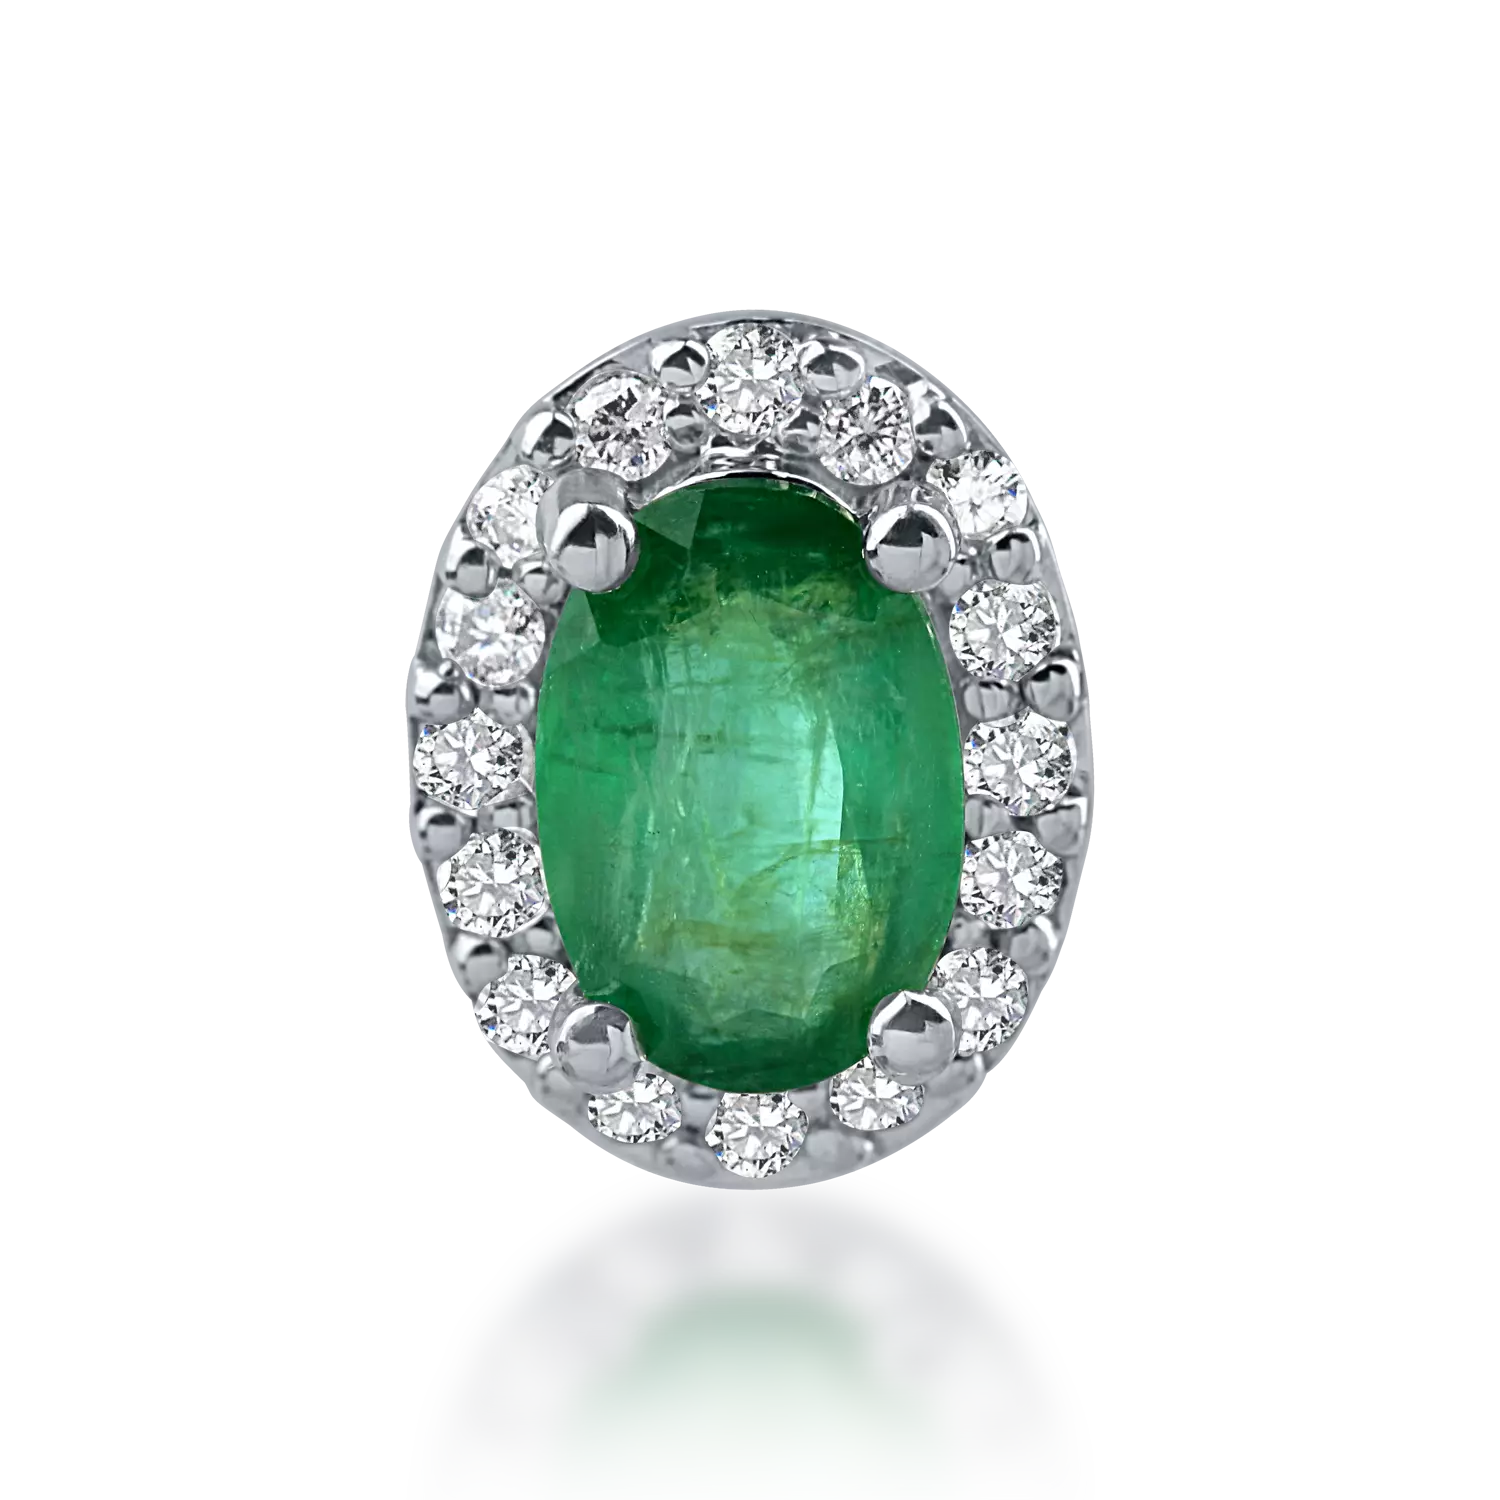 White gold oval pendant with 0.42ct emerald and 0.08ct diamonds